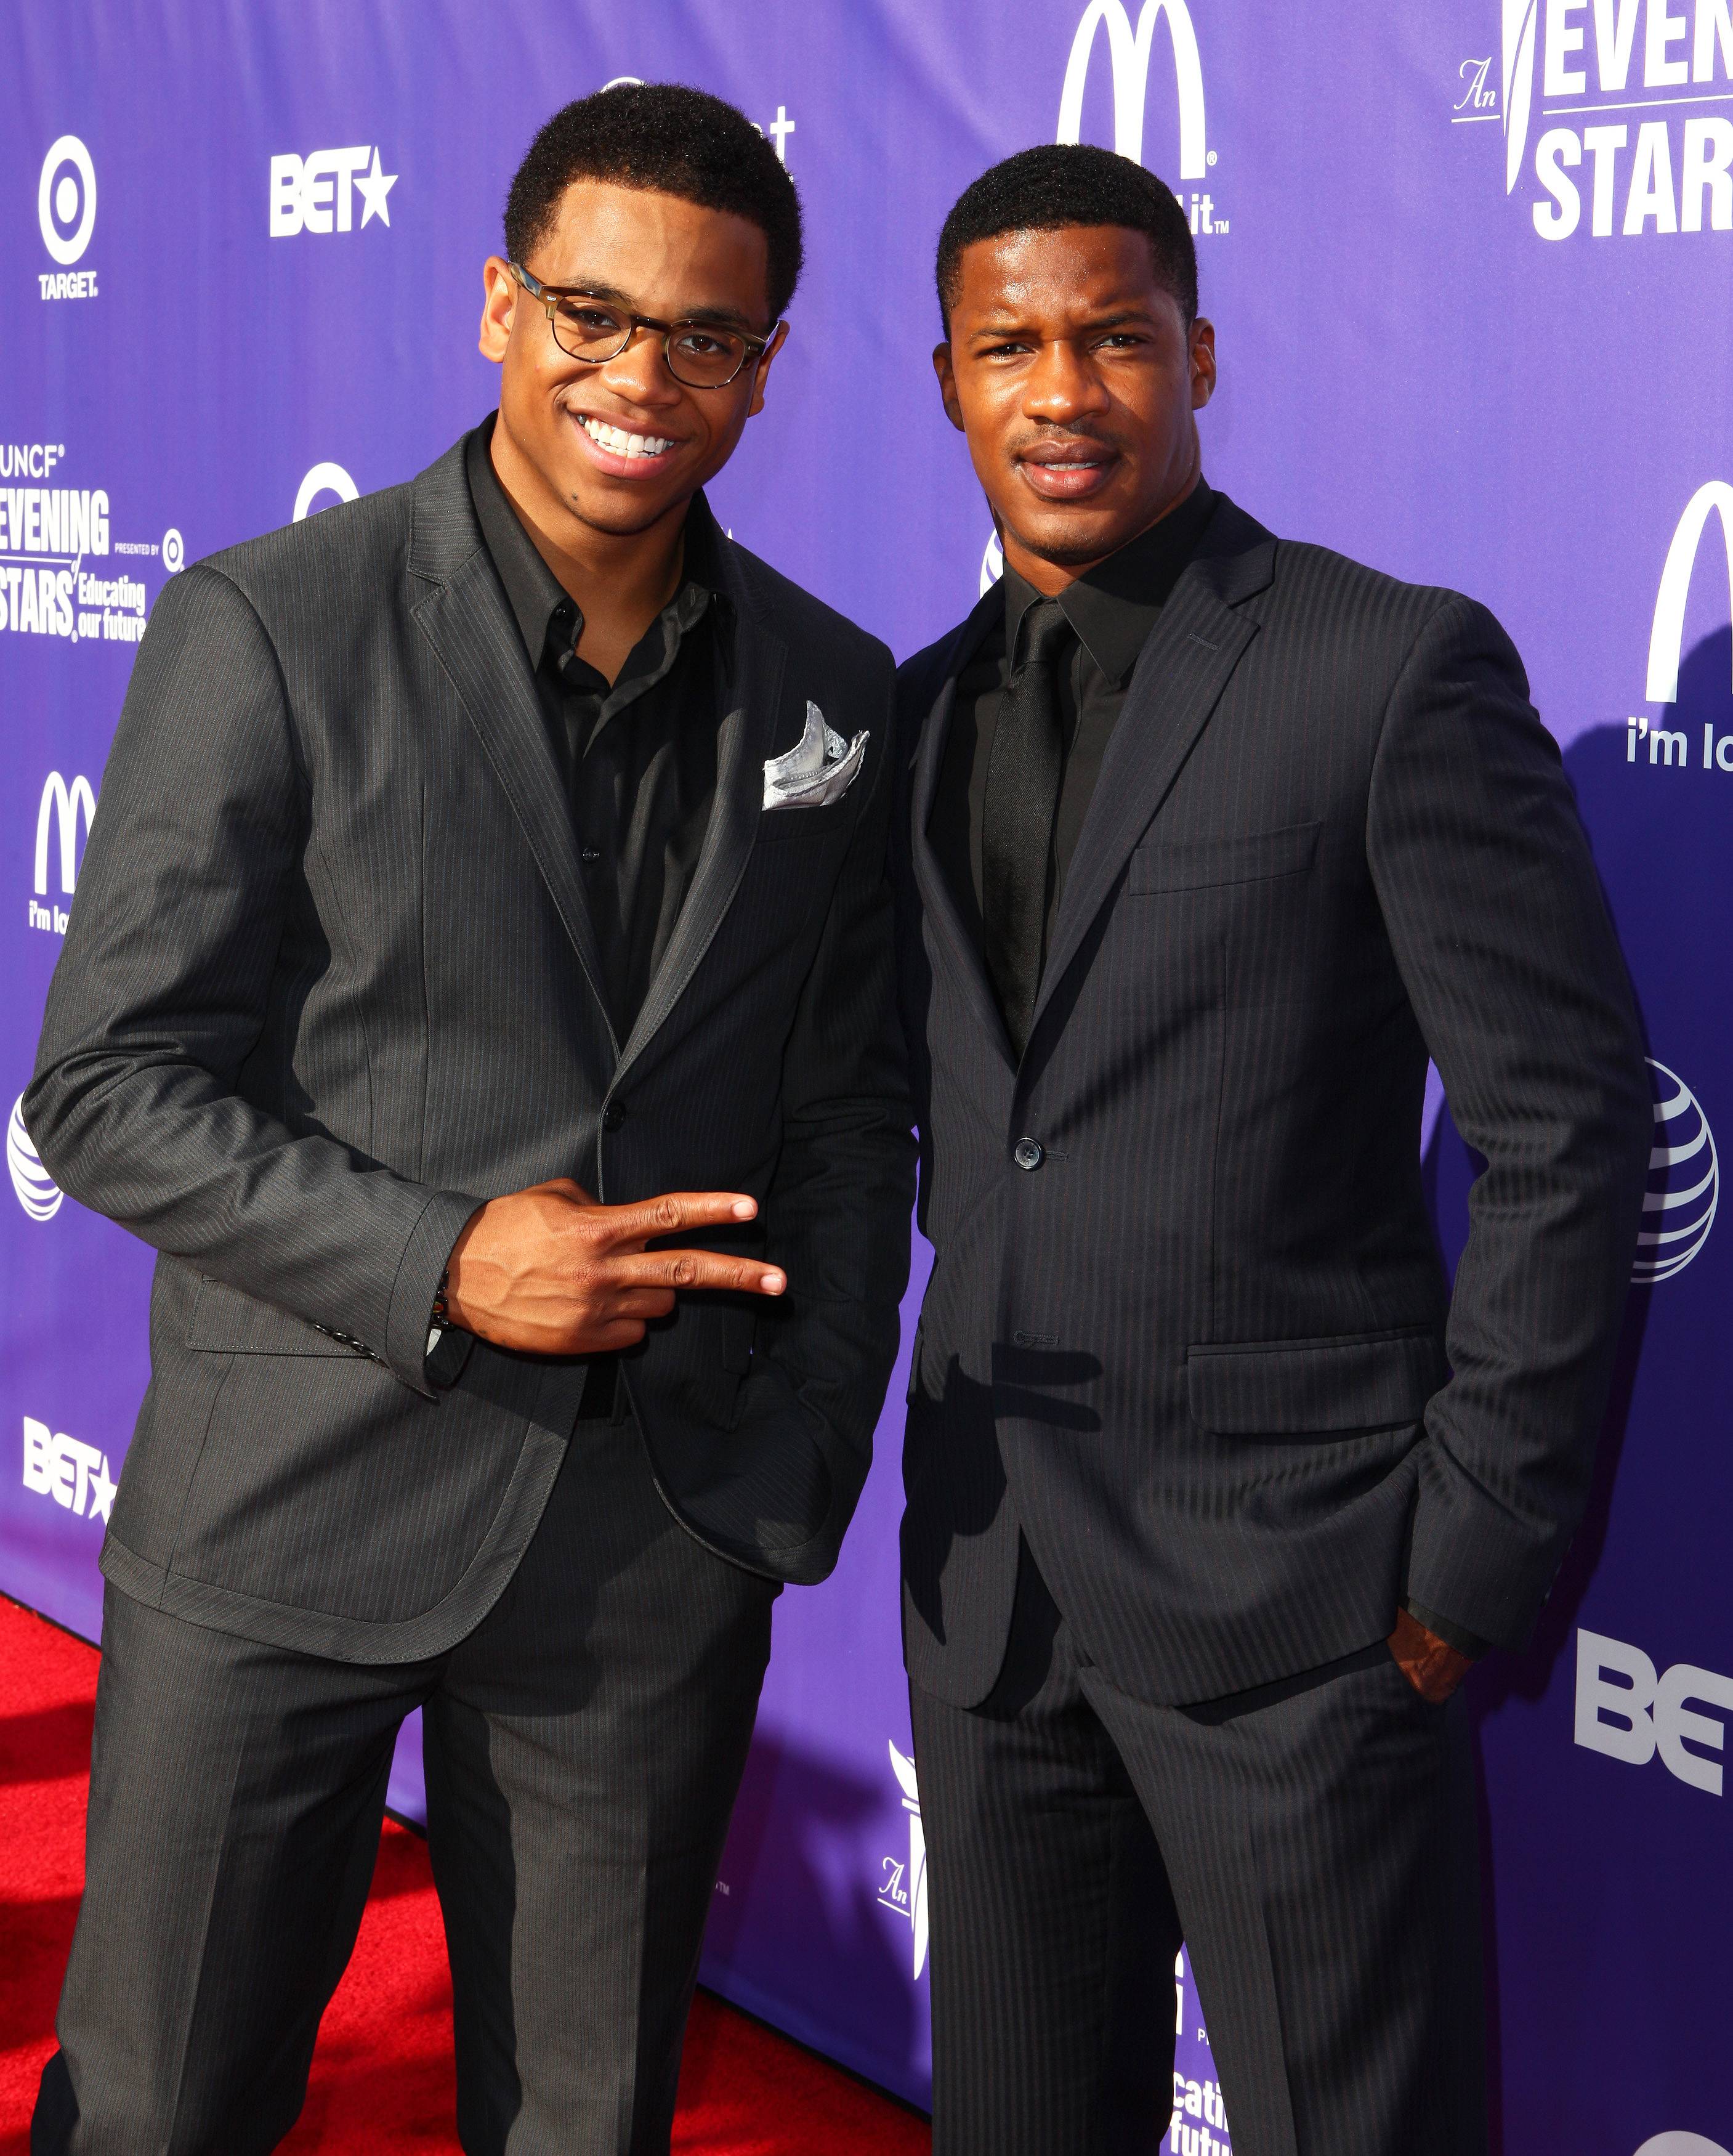 Tristan Wilds &amp; Nate Parker - Young Hollywood! Actors Tristan Wilds and Nate Parker get ready for a night of enlightenment.(Photo by Brian Dowling/PictureGroup)&nbsp;